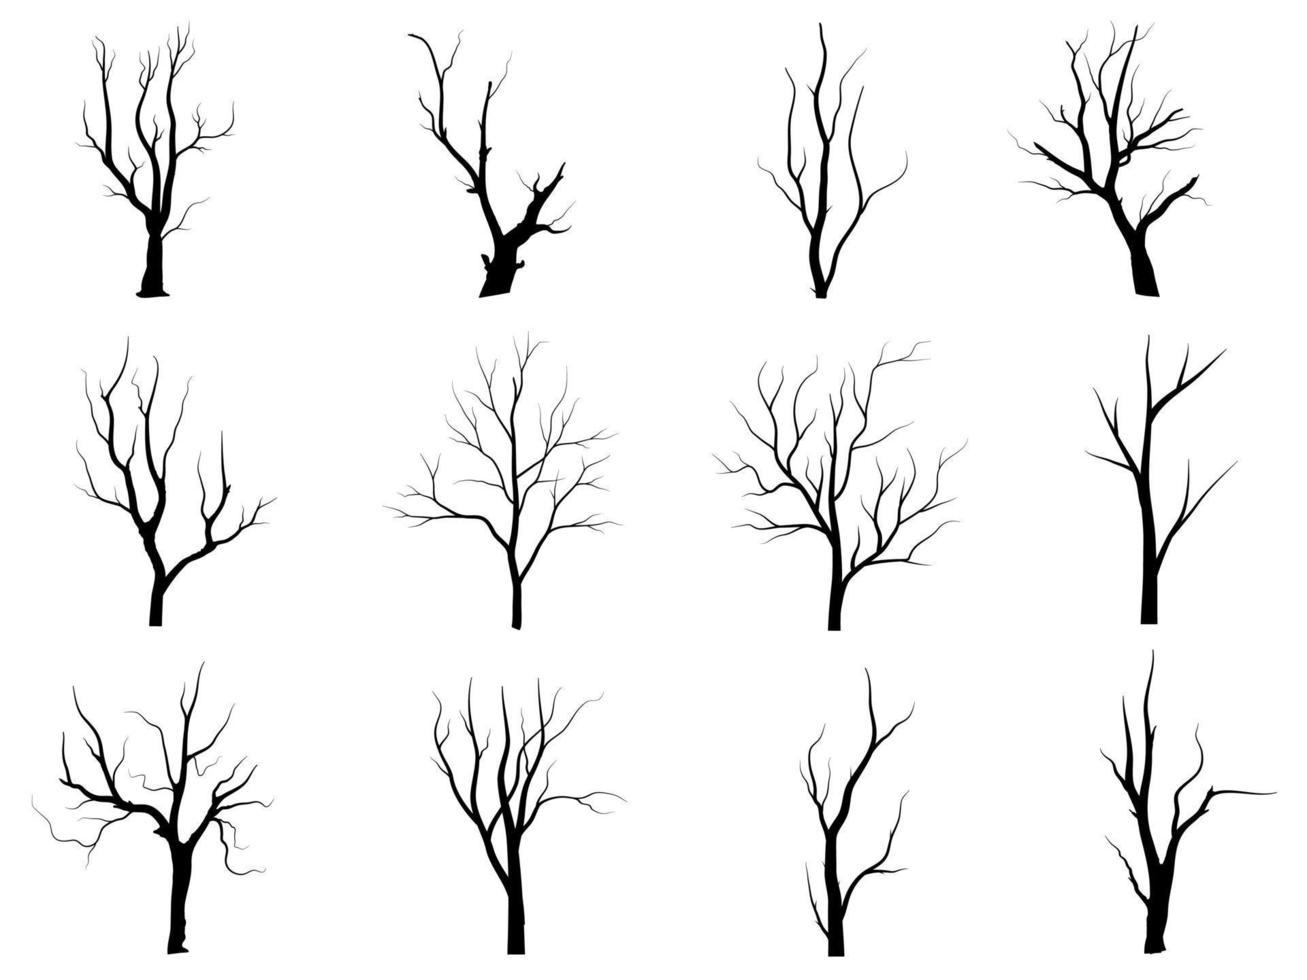 Black Branch Tree or Naked trees silhouettes set. Hand drawn isolated illustrations. vector